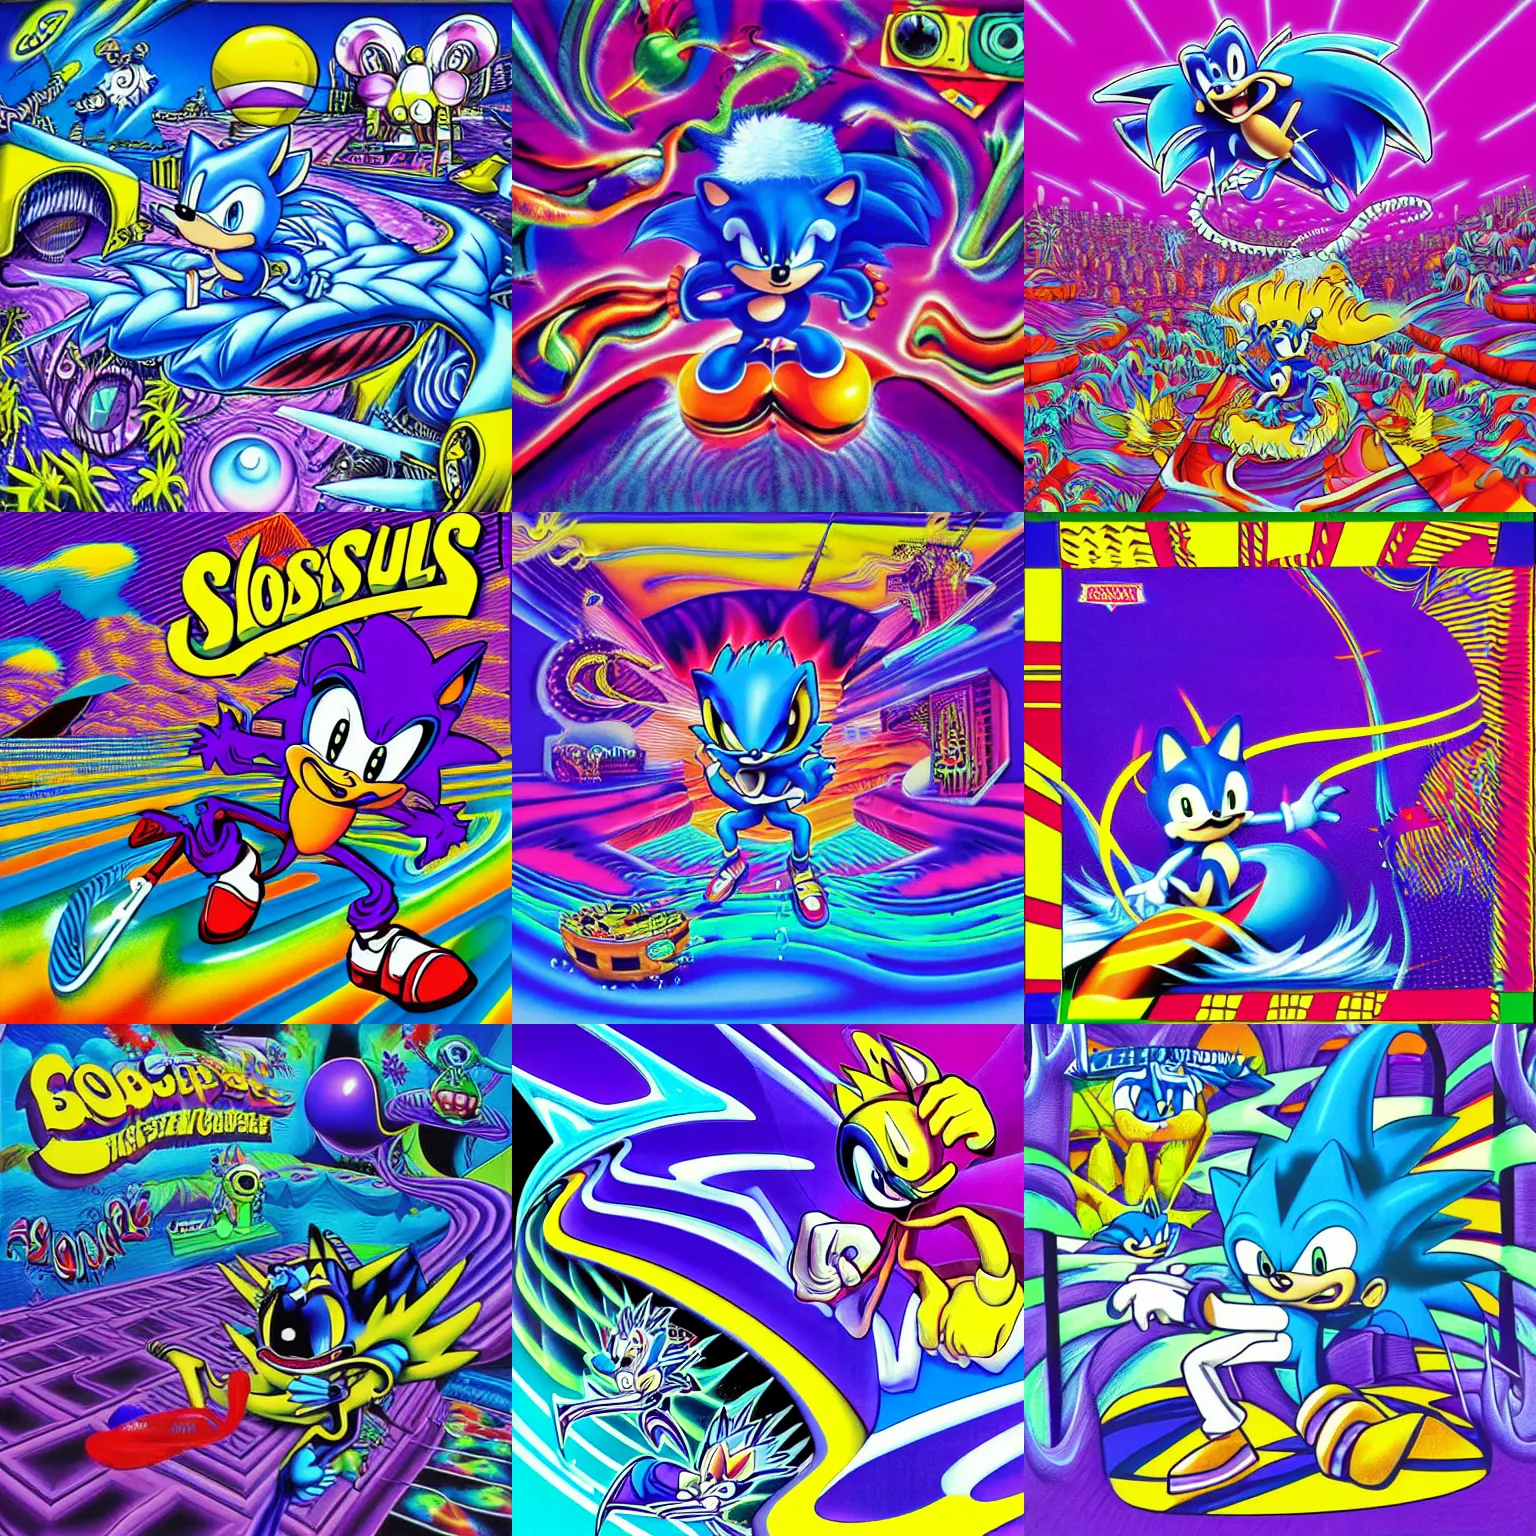 Prompt: surreal, sharp, lowbrow, detailed professional, high quality airbrush art mgmt album cover of a liquid dissolving lsd dmt blue sonic the hedgehog surfing through cyberspace, purple checkerboard background, 1 9 9 0 s 1 9 9 2 acid house techno sega genesis video game album cover